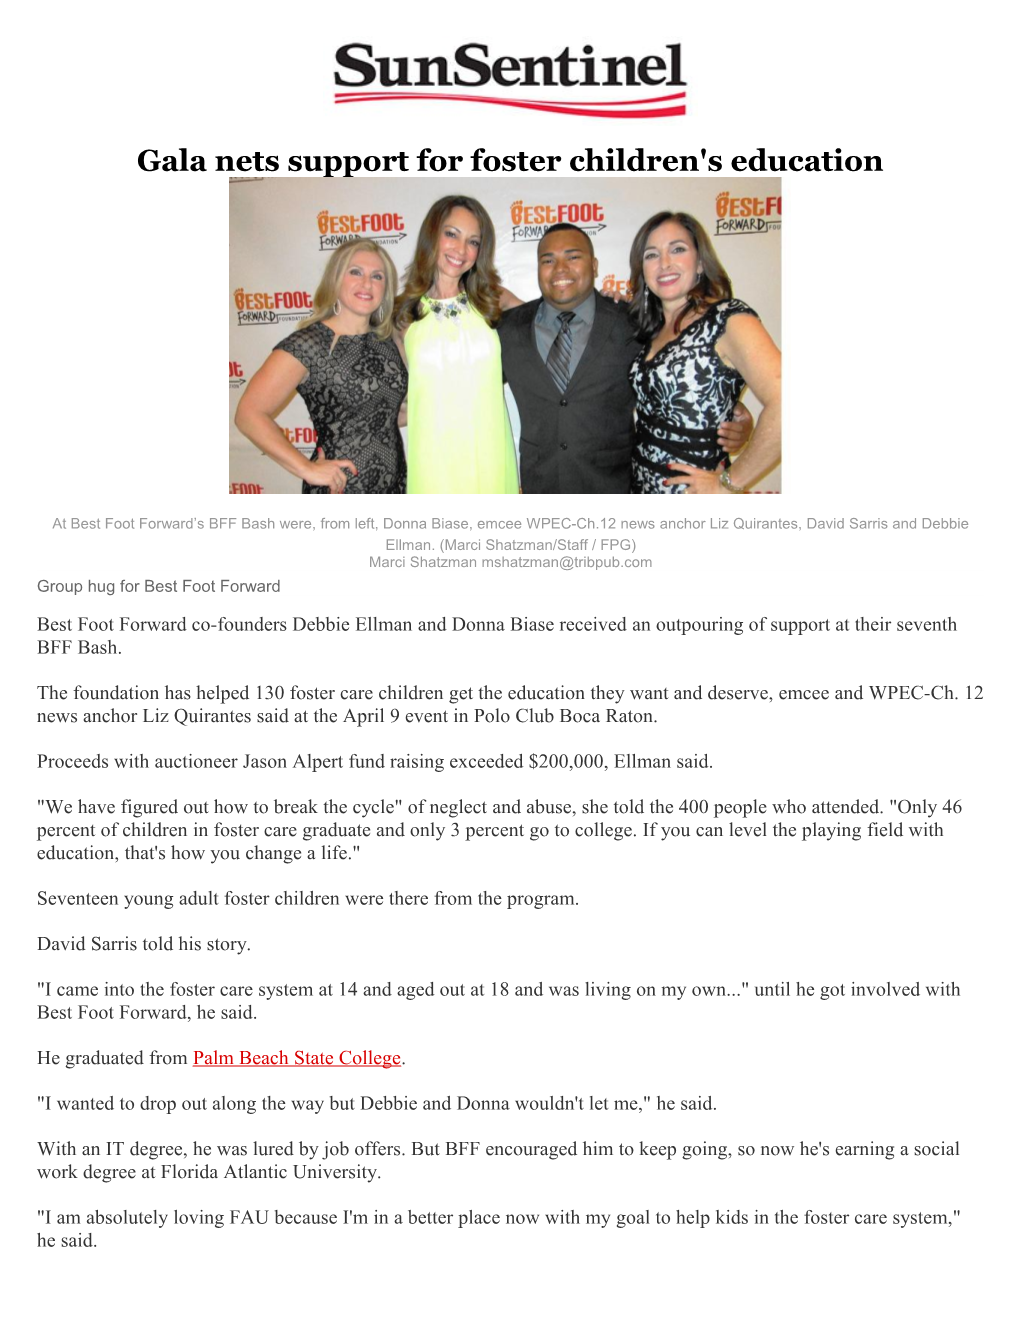 Gala Nets Support for Foster Children's Education